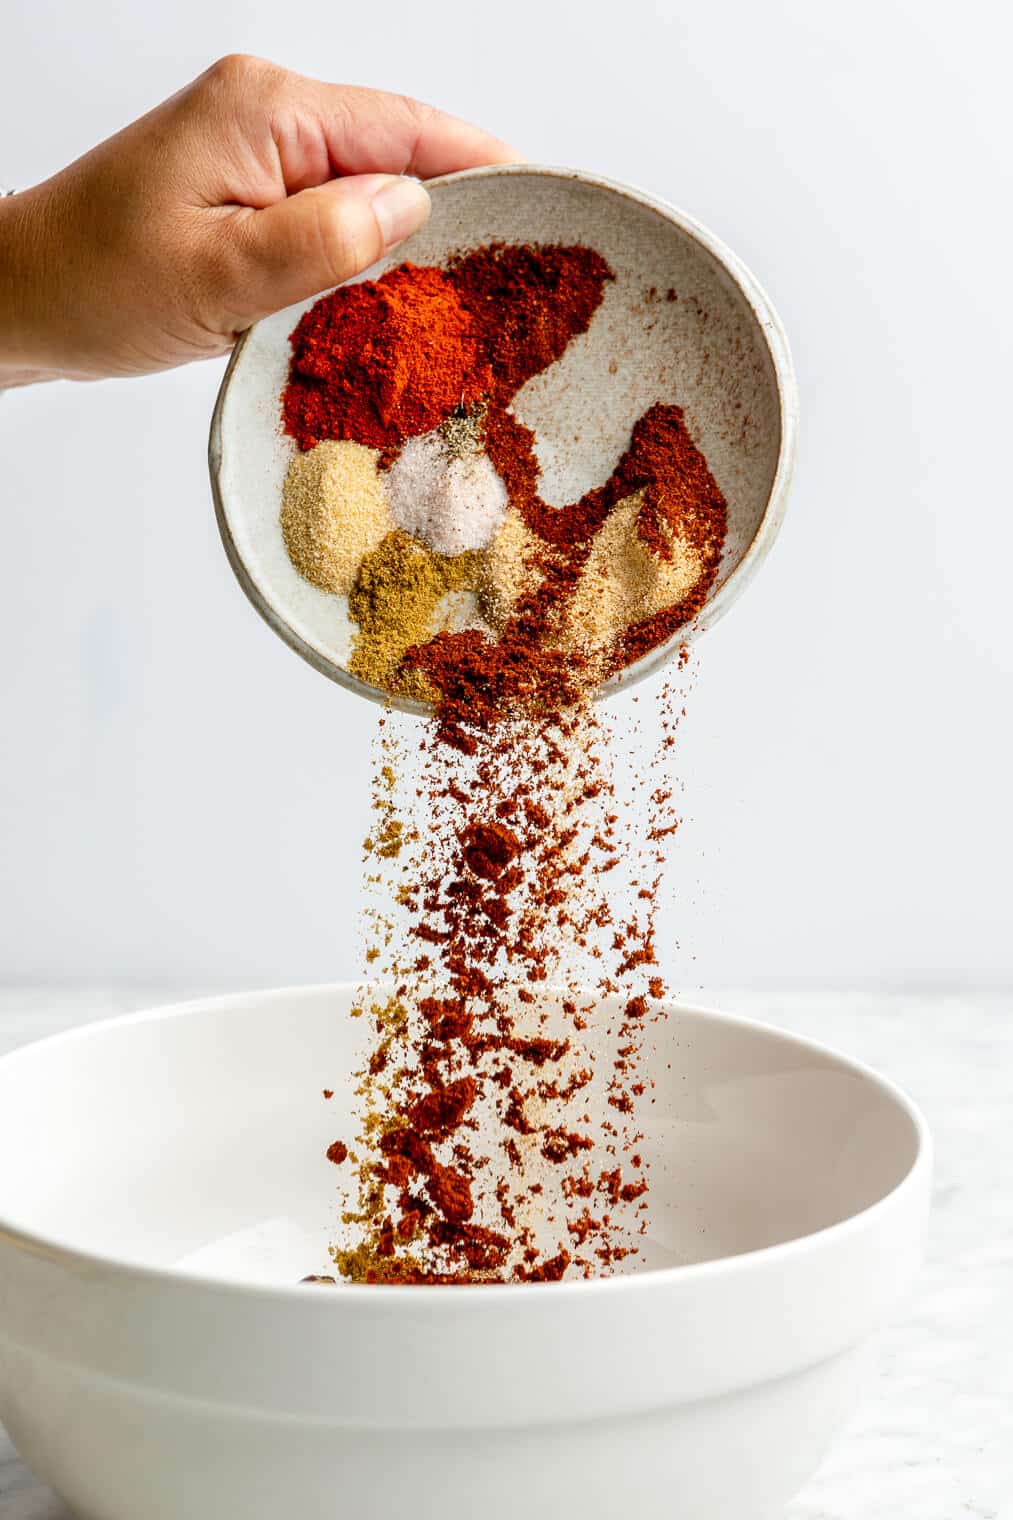 A hand pouring a small plate full of spices into a white bowl sitting on a grey and white marble surface with a white background.